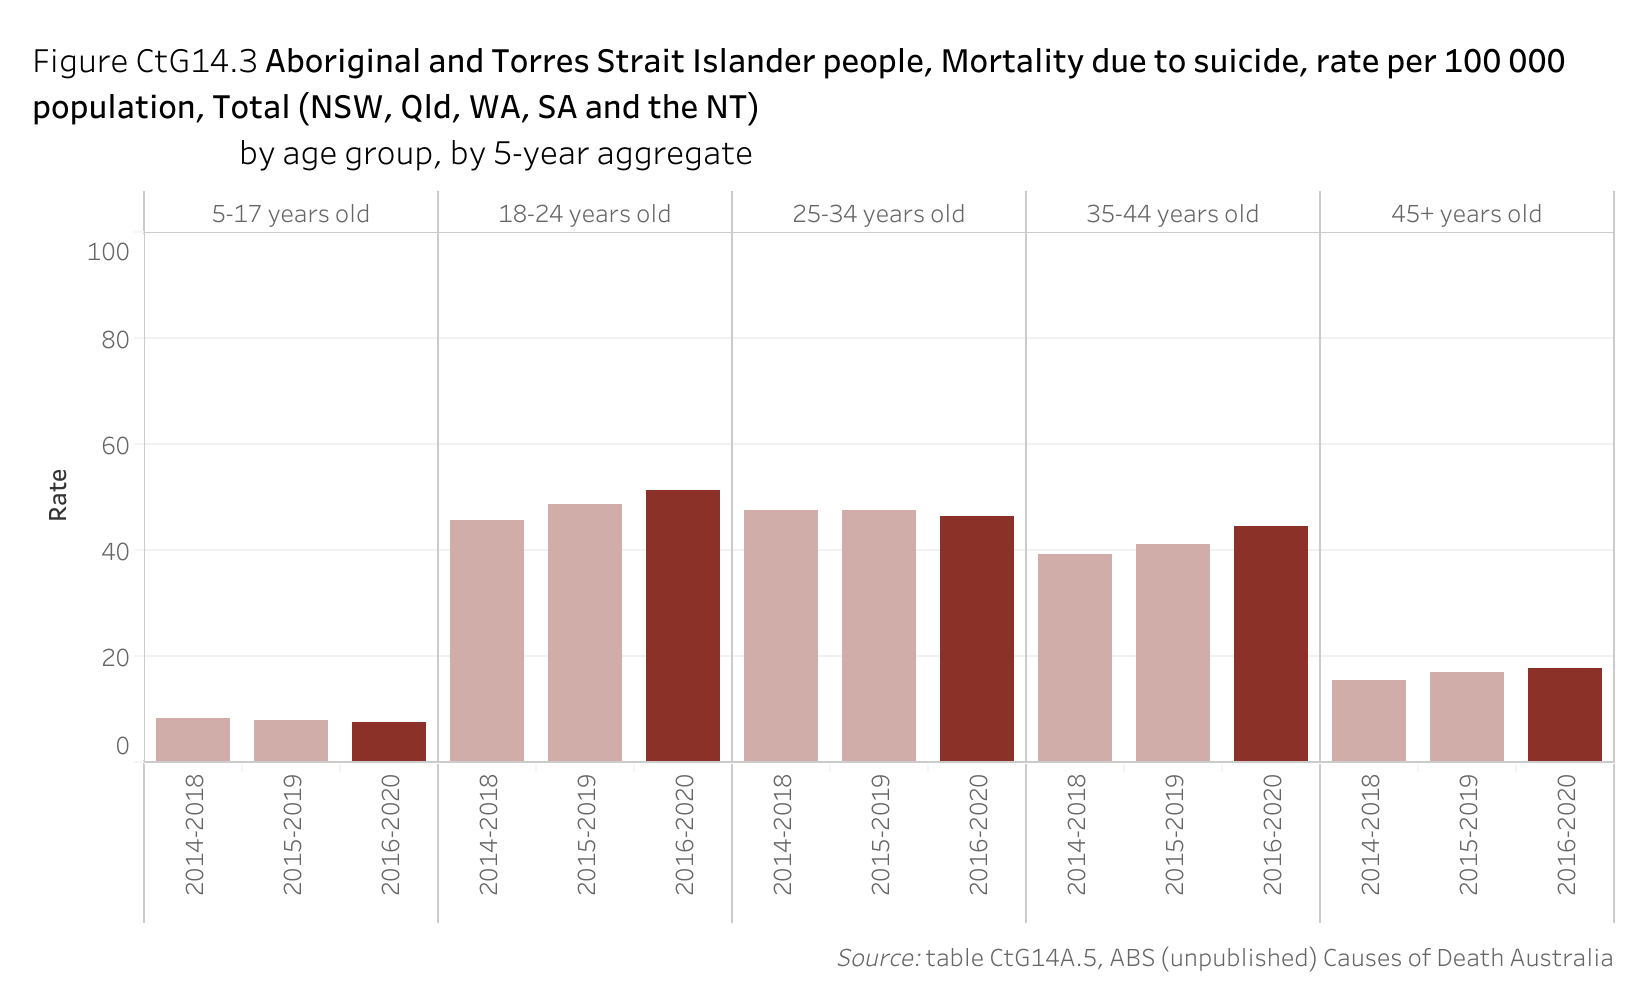 Figure CtG14.3. Bar chart showing the rate of mortality due to suicide of Aboriginal and Torres Strait Islander people per 100 000 population (total for NSW, Qld, WA, SA and the NT), by age group and by 5-year aggregate. Data table of figure CtG14.3 is below.